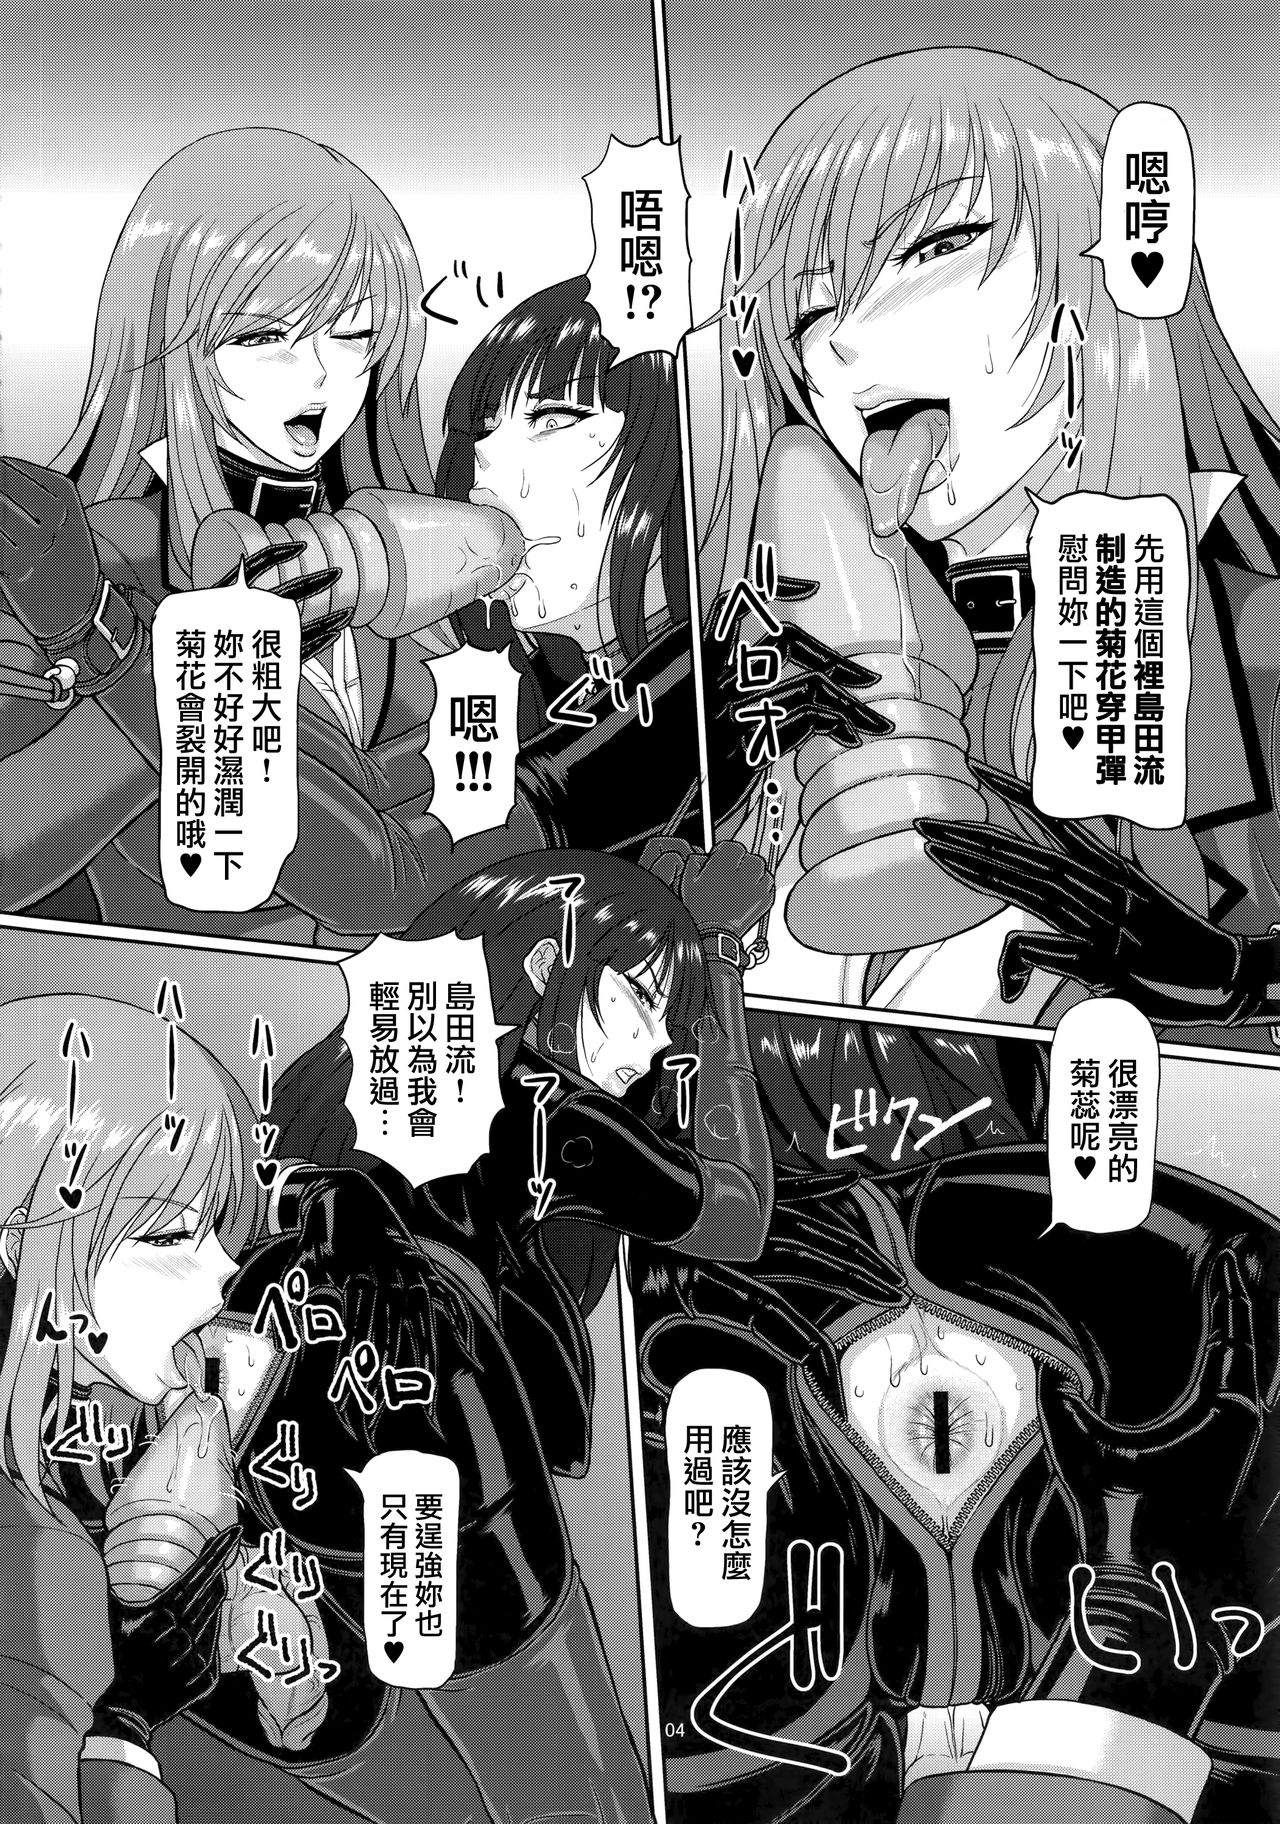 (C92) [SERIOUS GRAPHICS (ICE)] ICE BOXXX 21 ACT OF DARKNESS (Girls und Panzer) [Chinese] [无毒汉化组扶毒分部] page 6 full